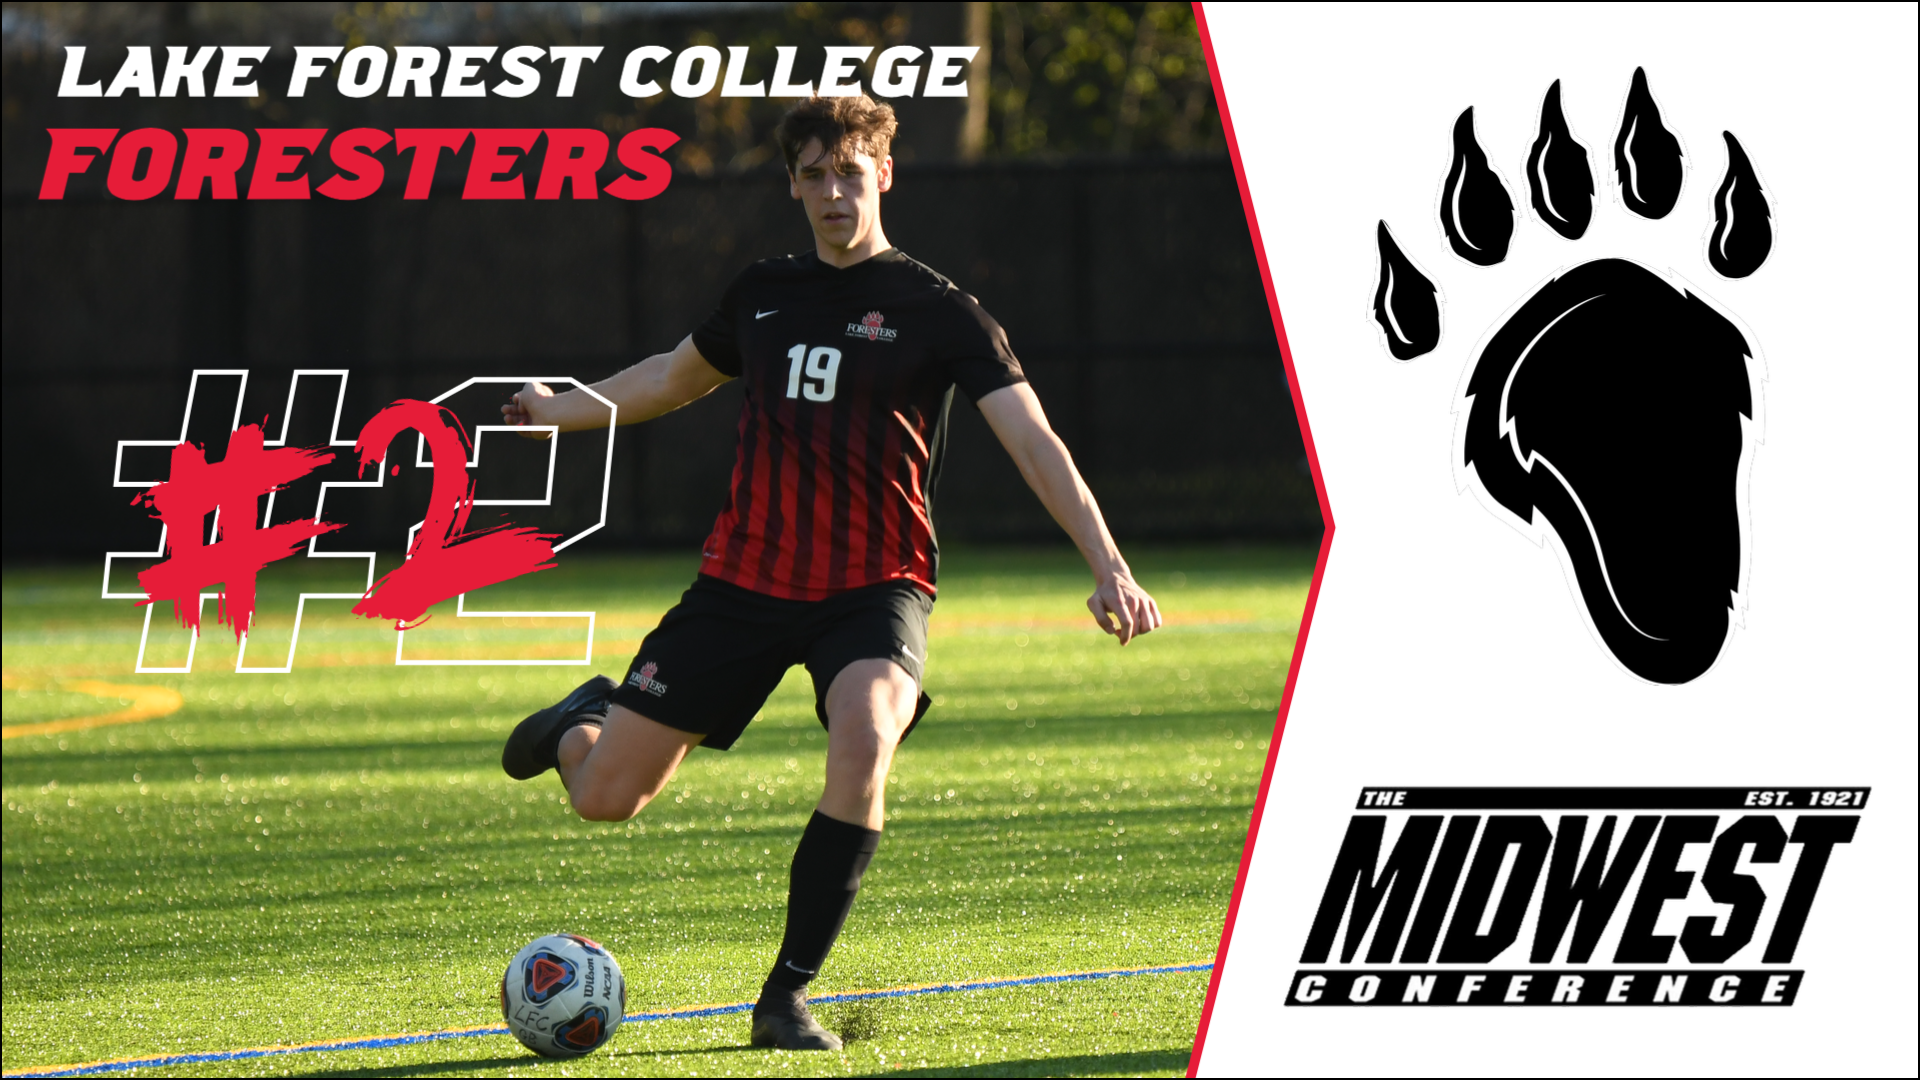 Foresters Picked to Finish Second in League per MWC Coaches' Poll